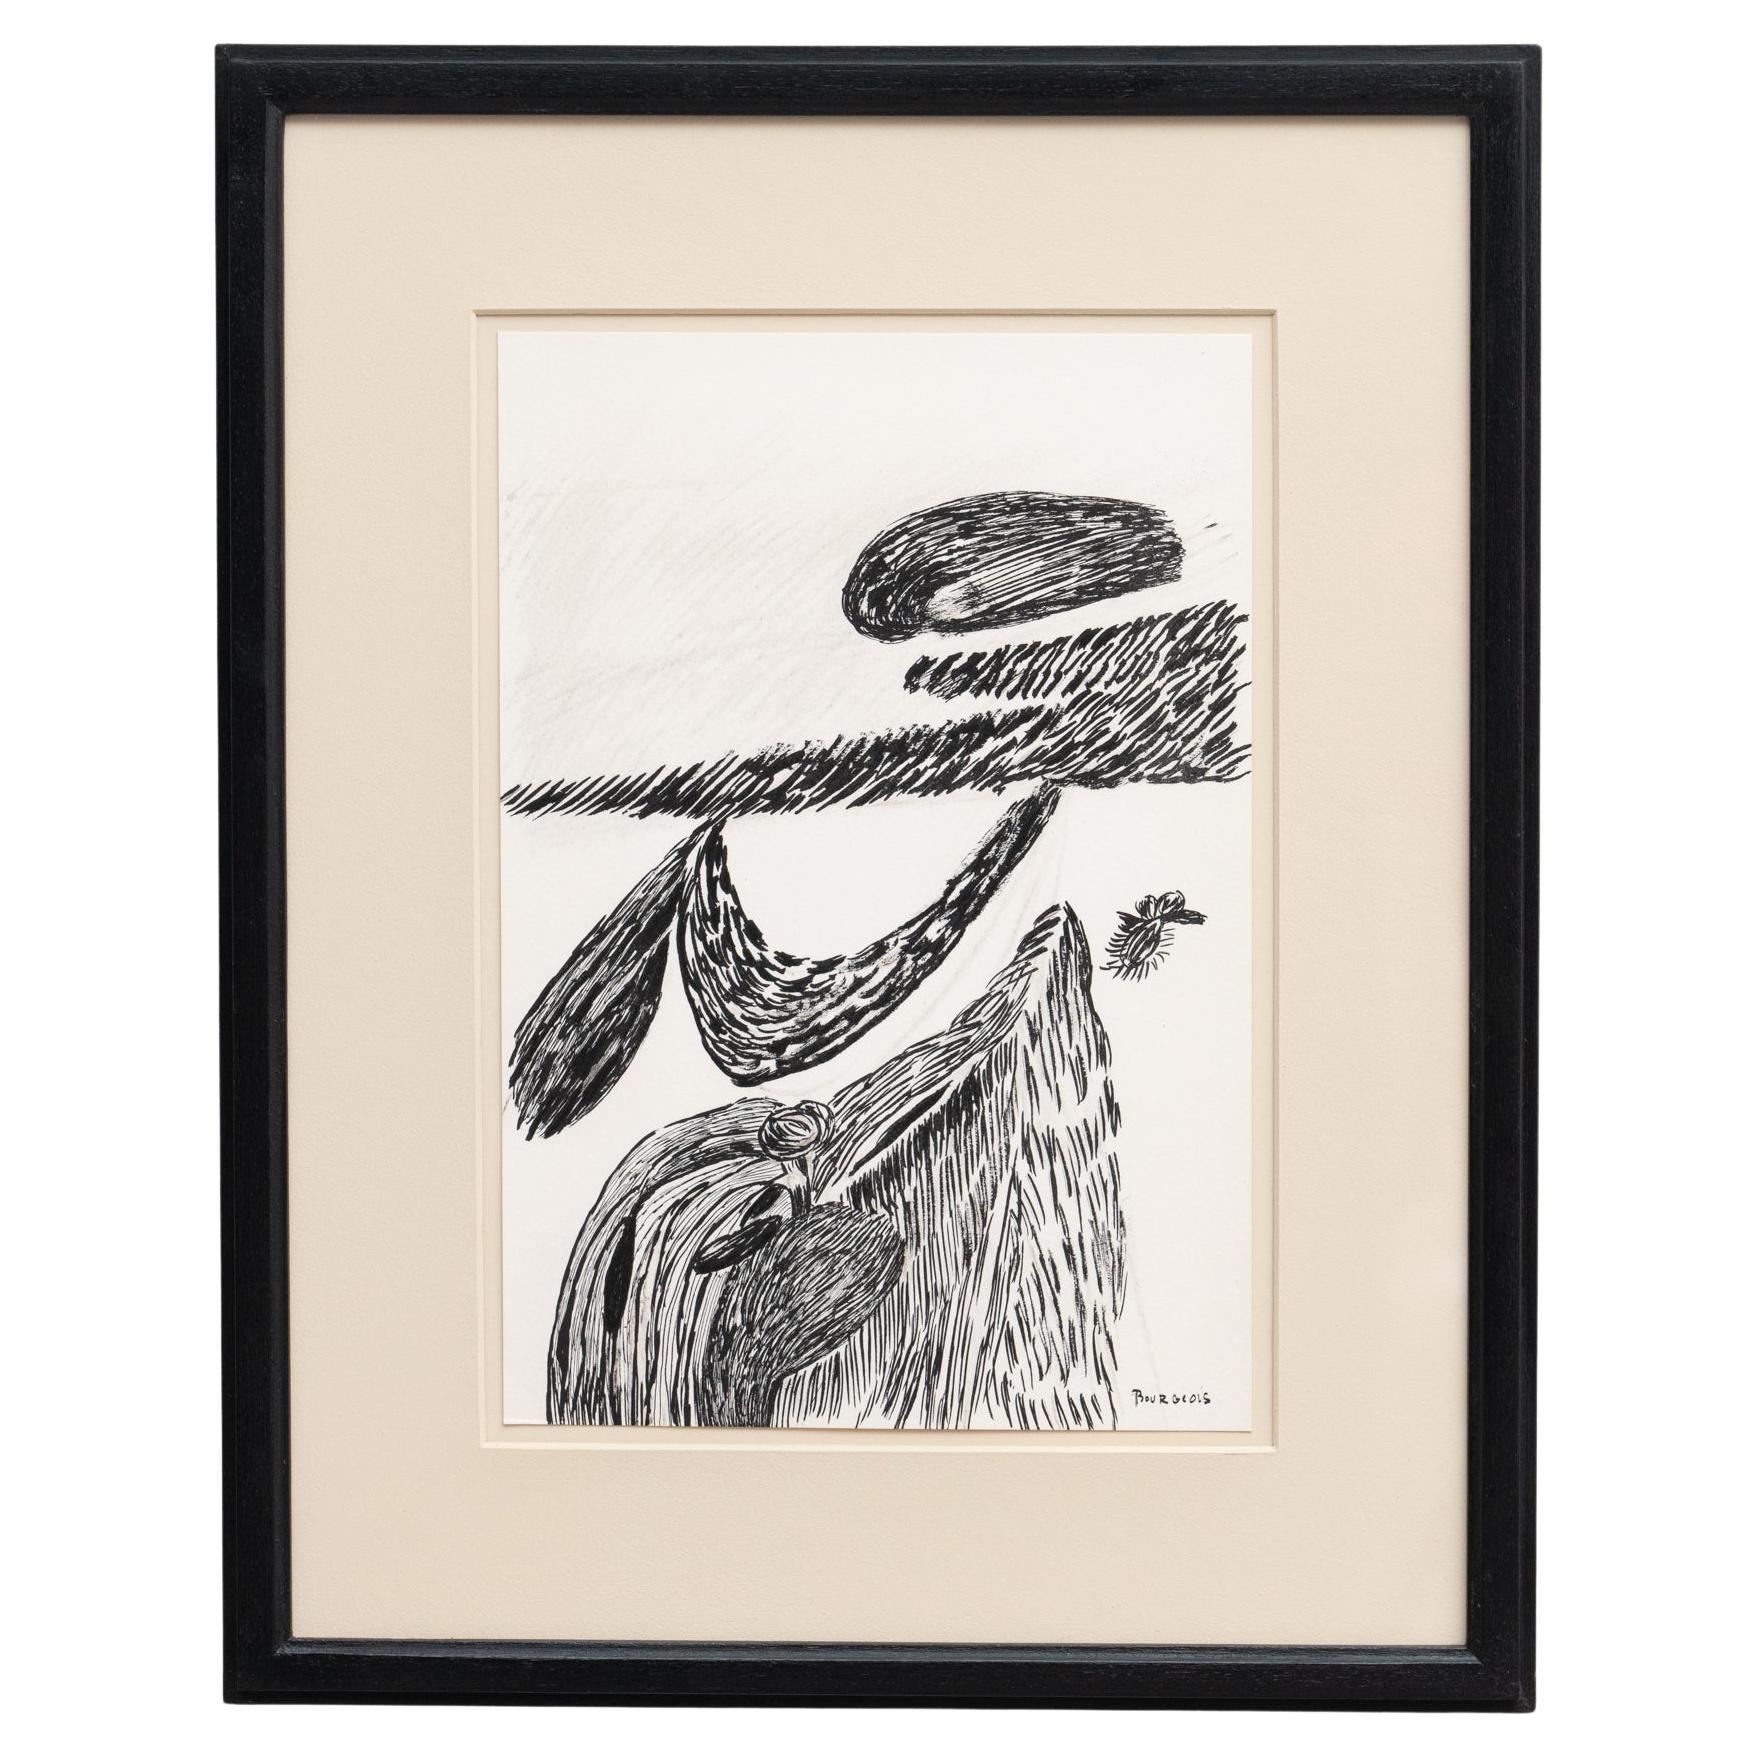 Louise Bourgeois 'Inner Life' Lithography, 1985 For Sale